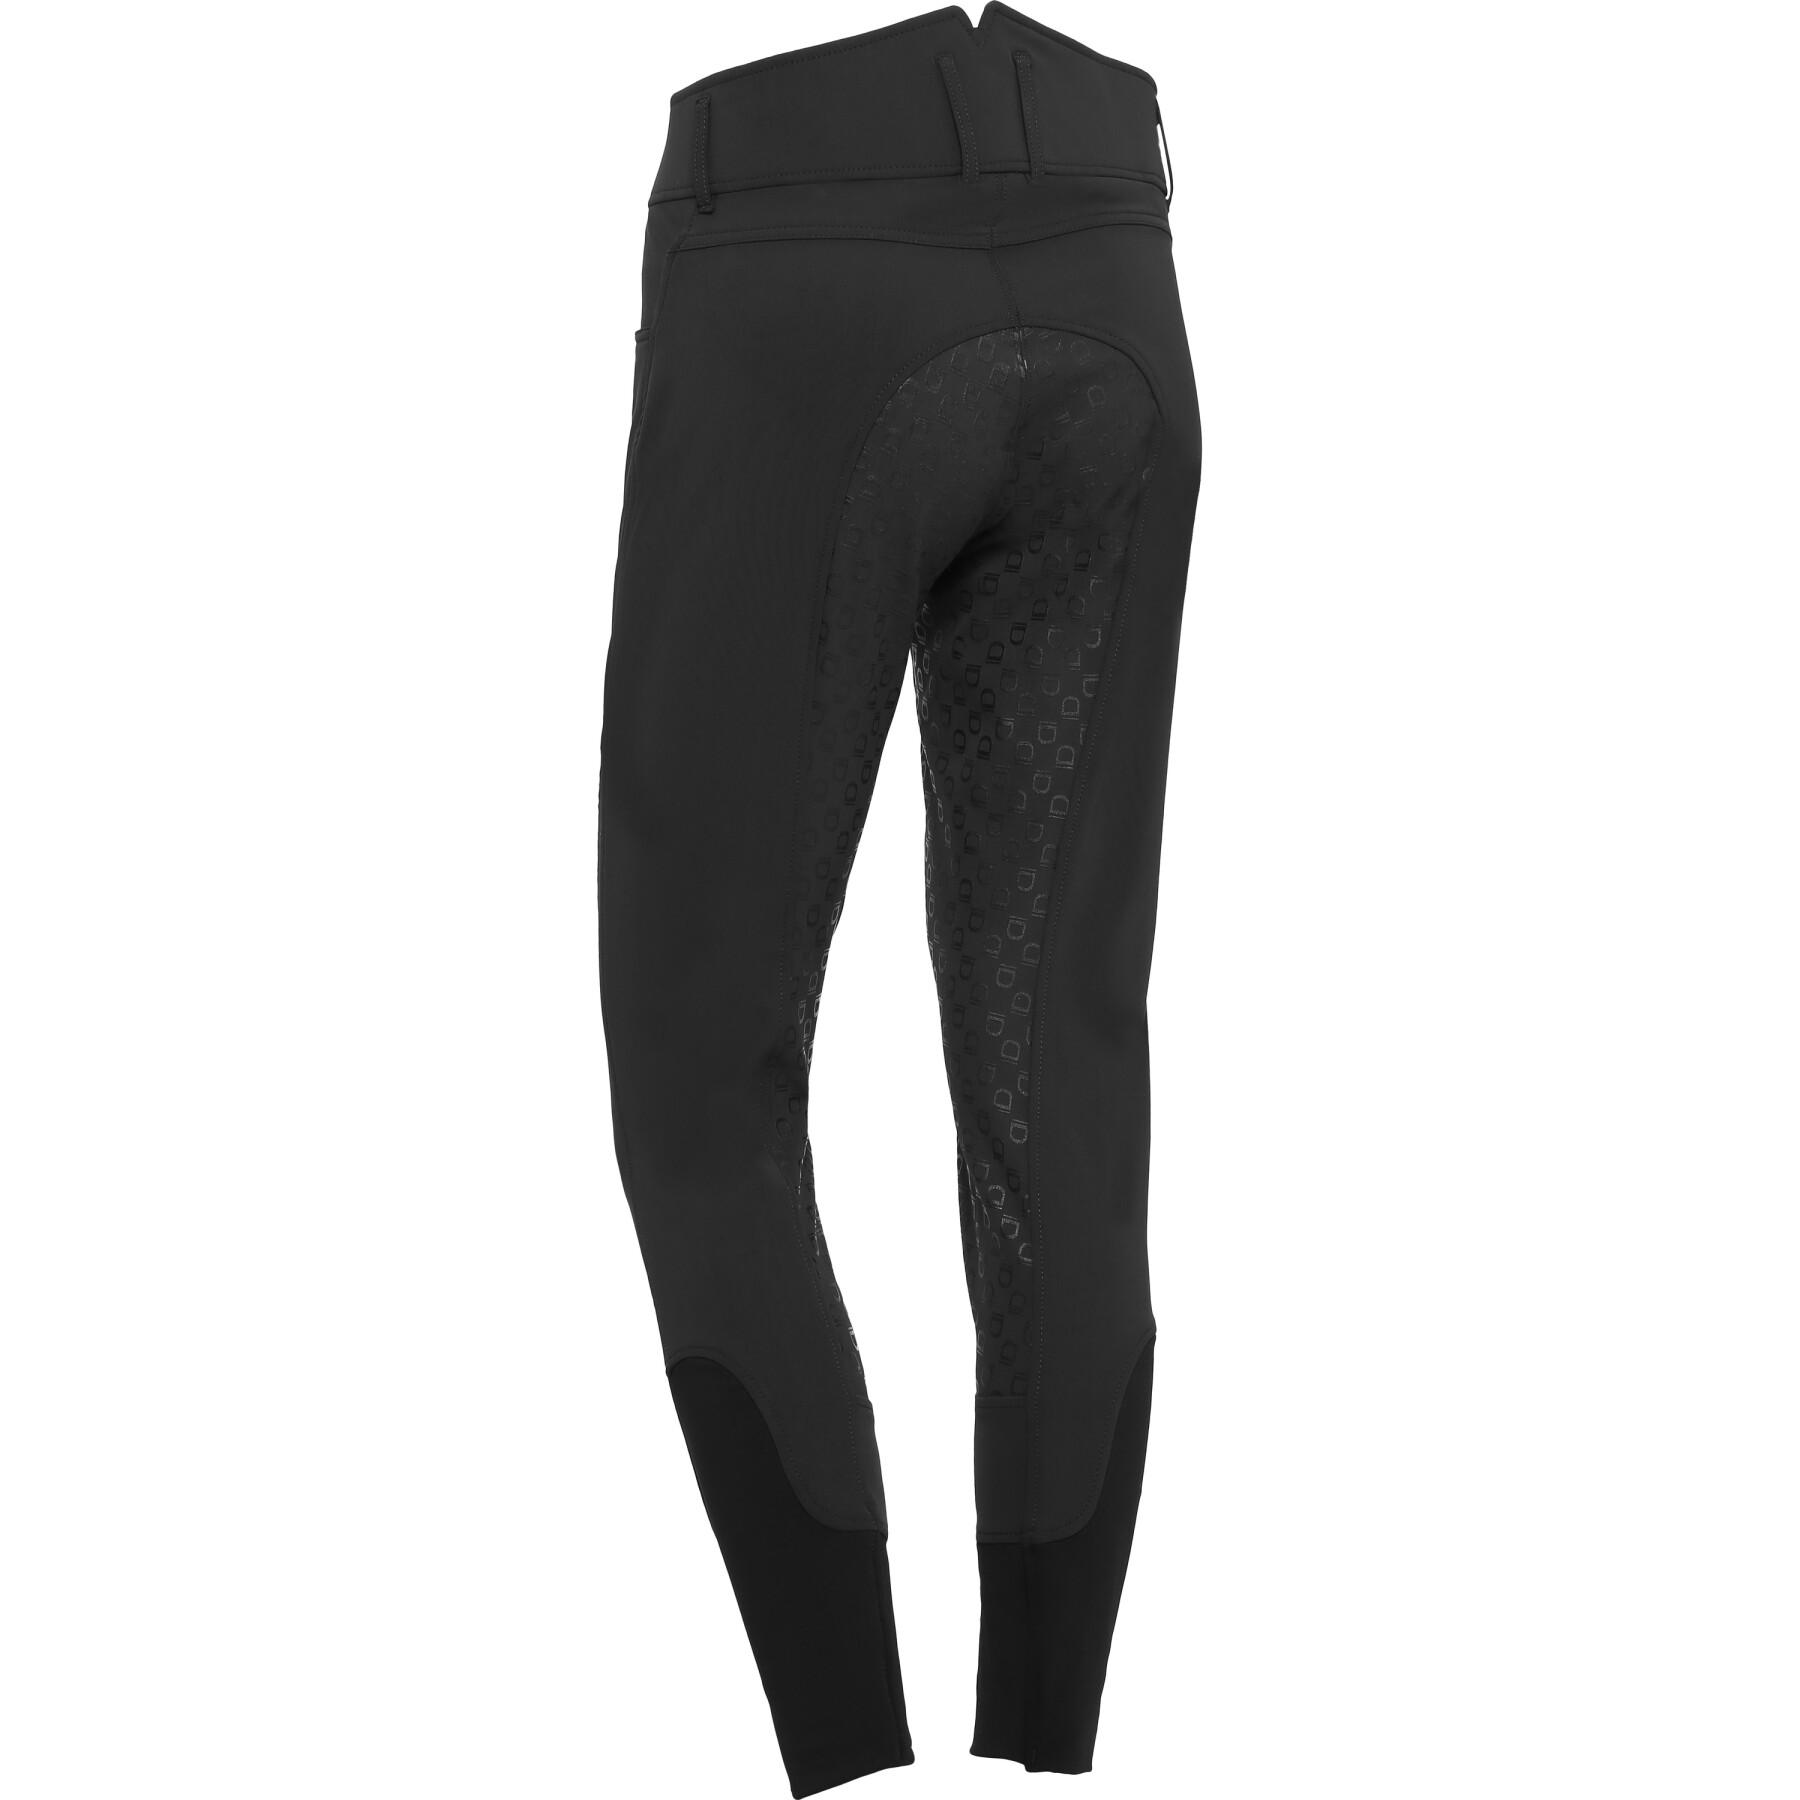 Women's full grip high-waisted riding pants Equipage Andalouse